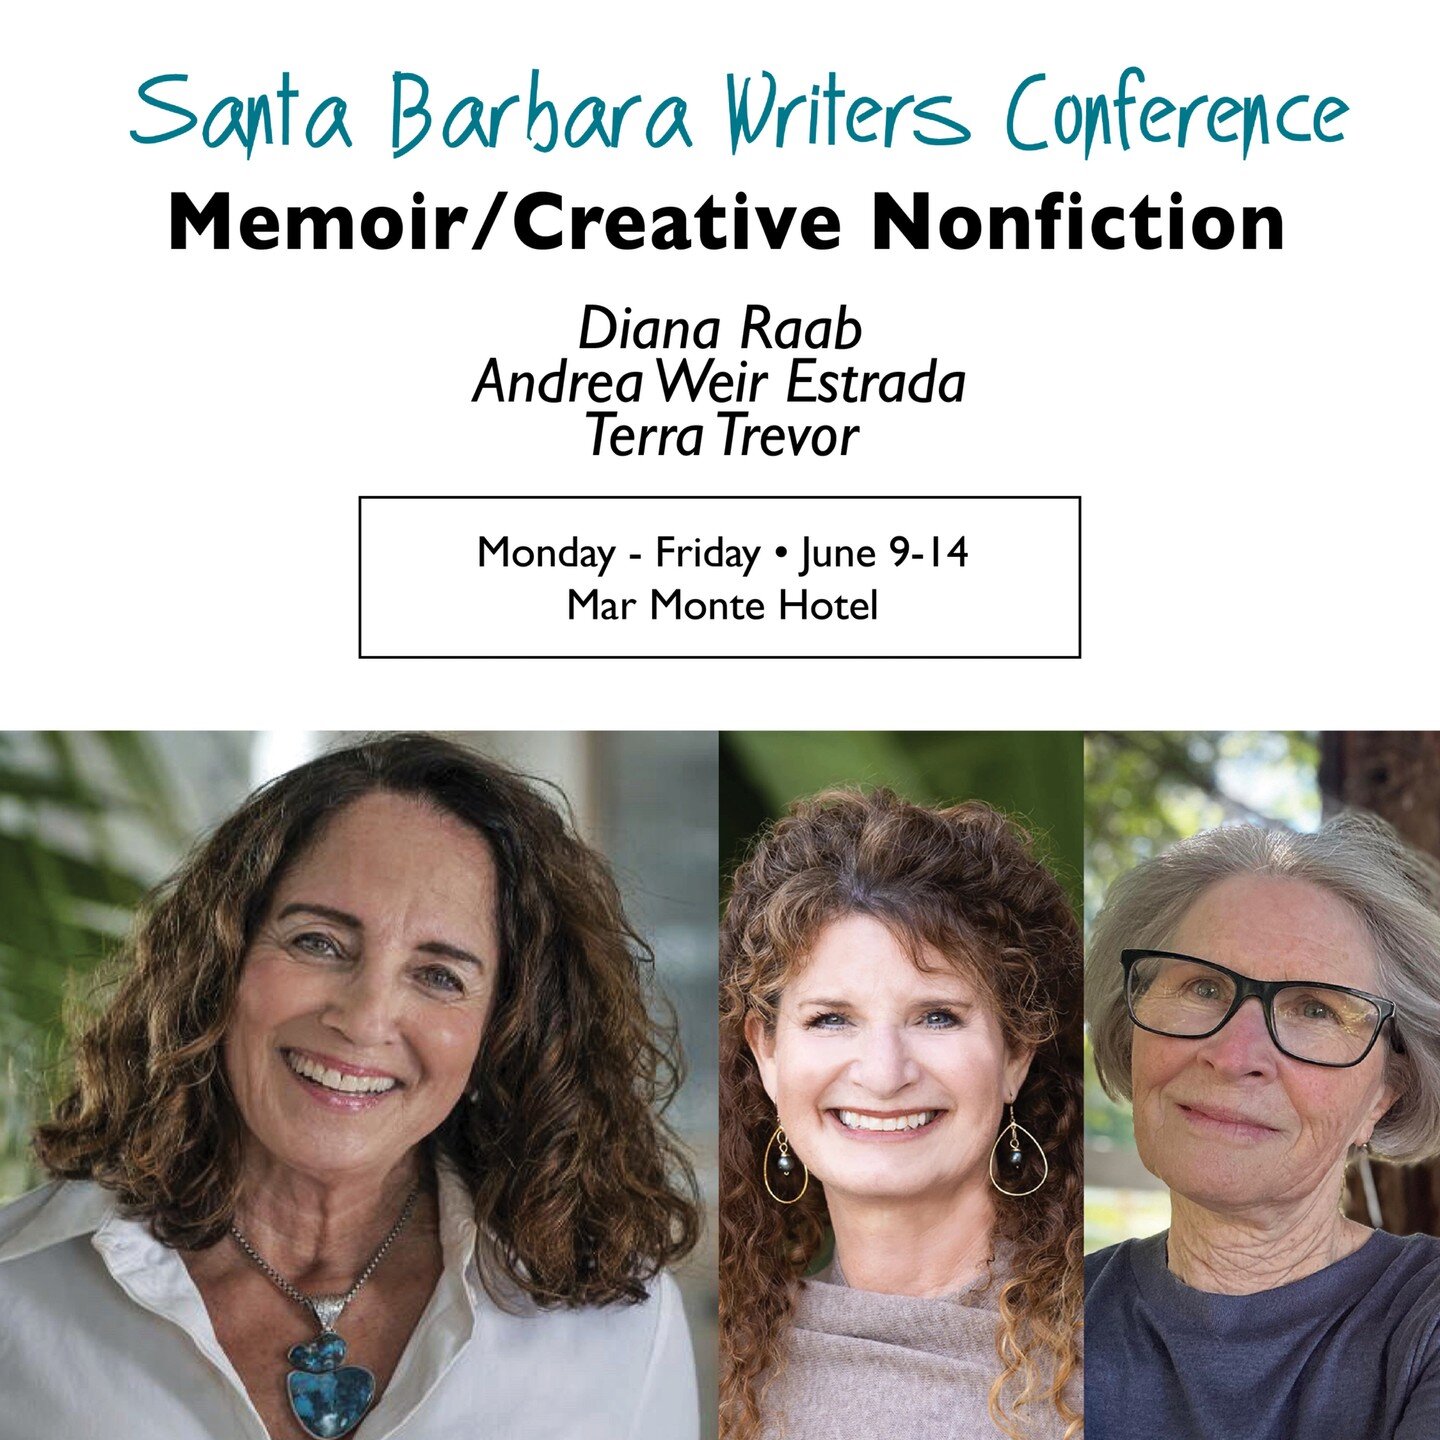 Memoir and creative nonfiction is well covered at SBWC. Diana Raab teaches memoir all five mornings. Andrea Weir Estrada and Terra Trevor will switch off to cover creative nonfiction all five afternoons of this June&rsquo;s conference.